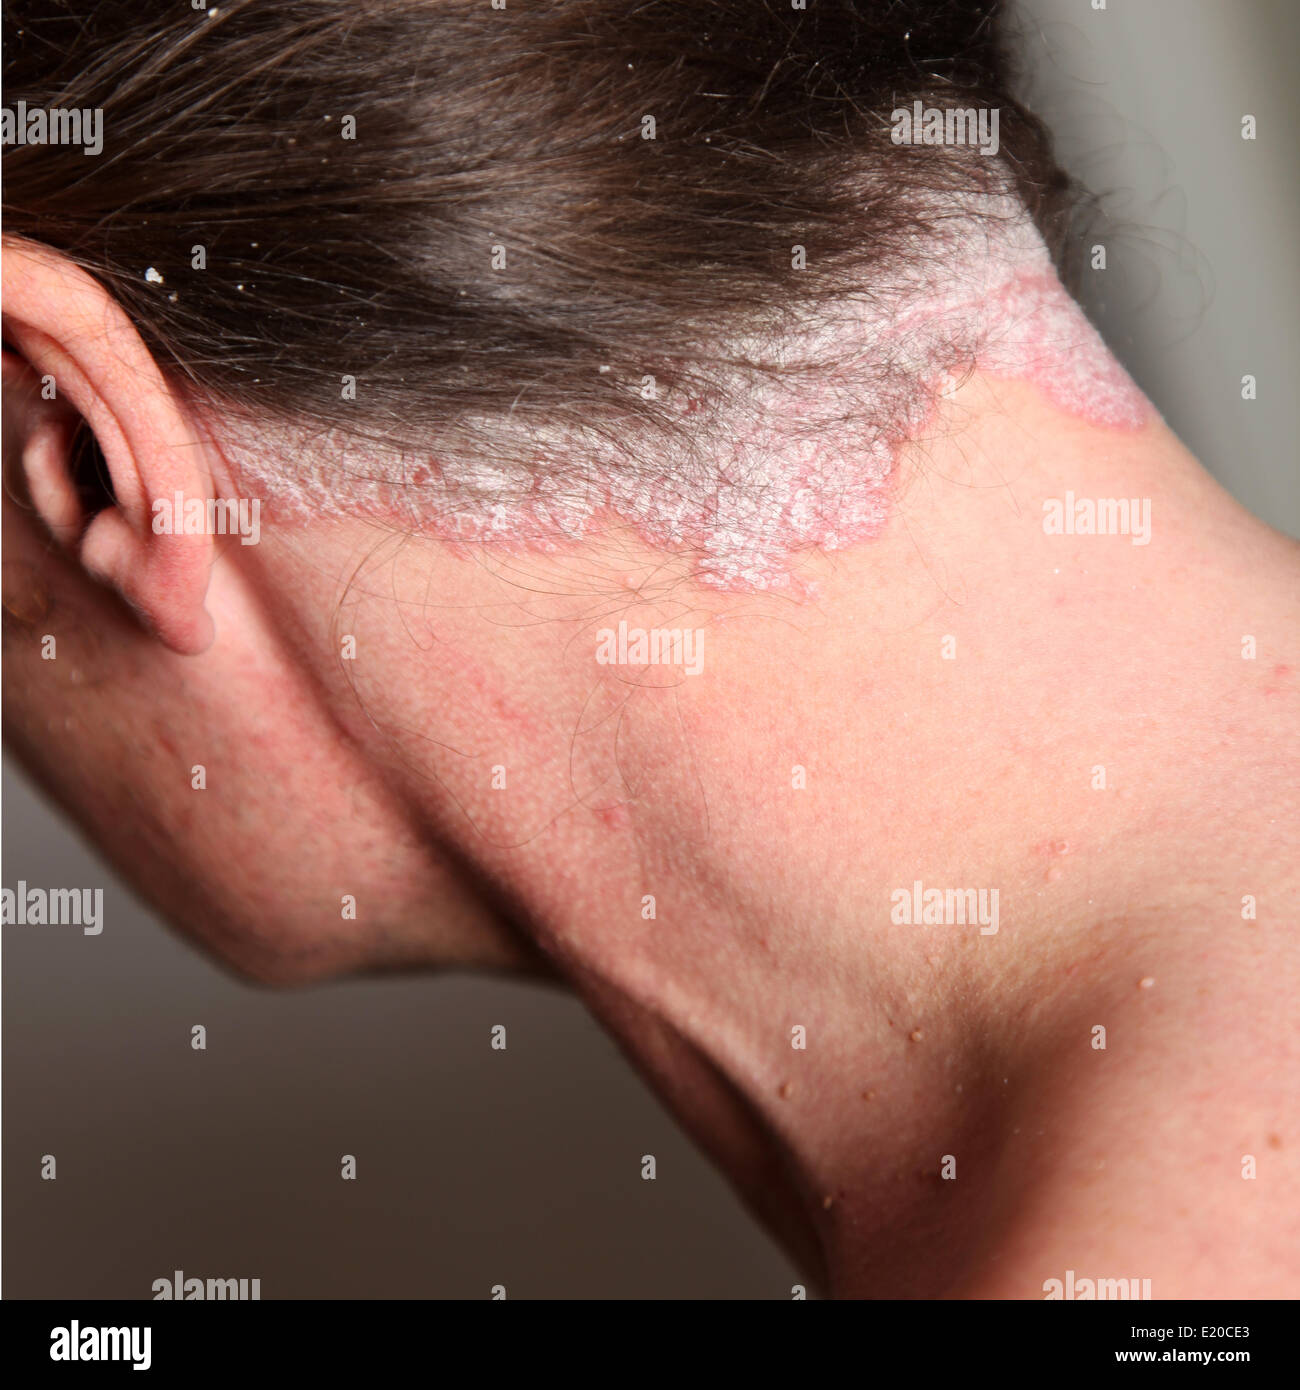 Psoriasis And Neck High Resolution Stock Photography And Images Alamy